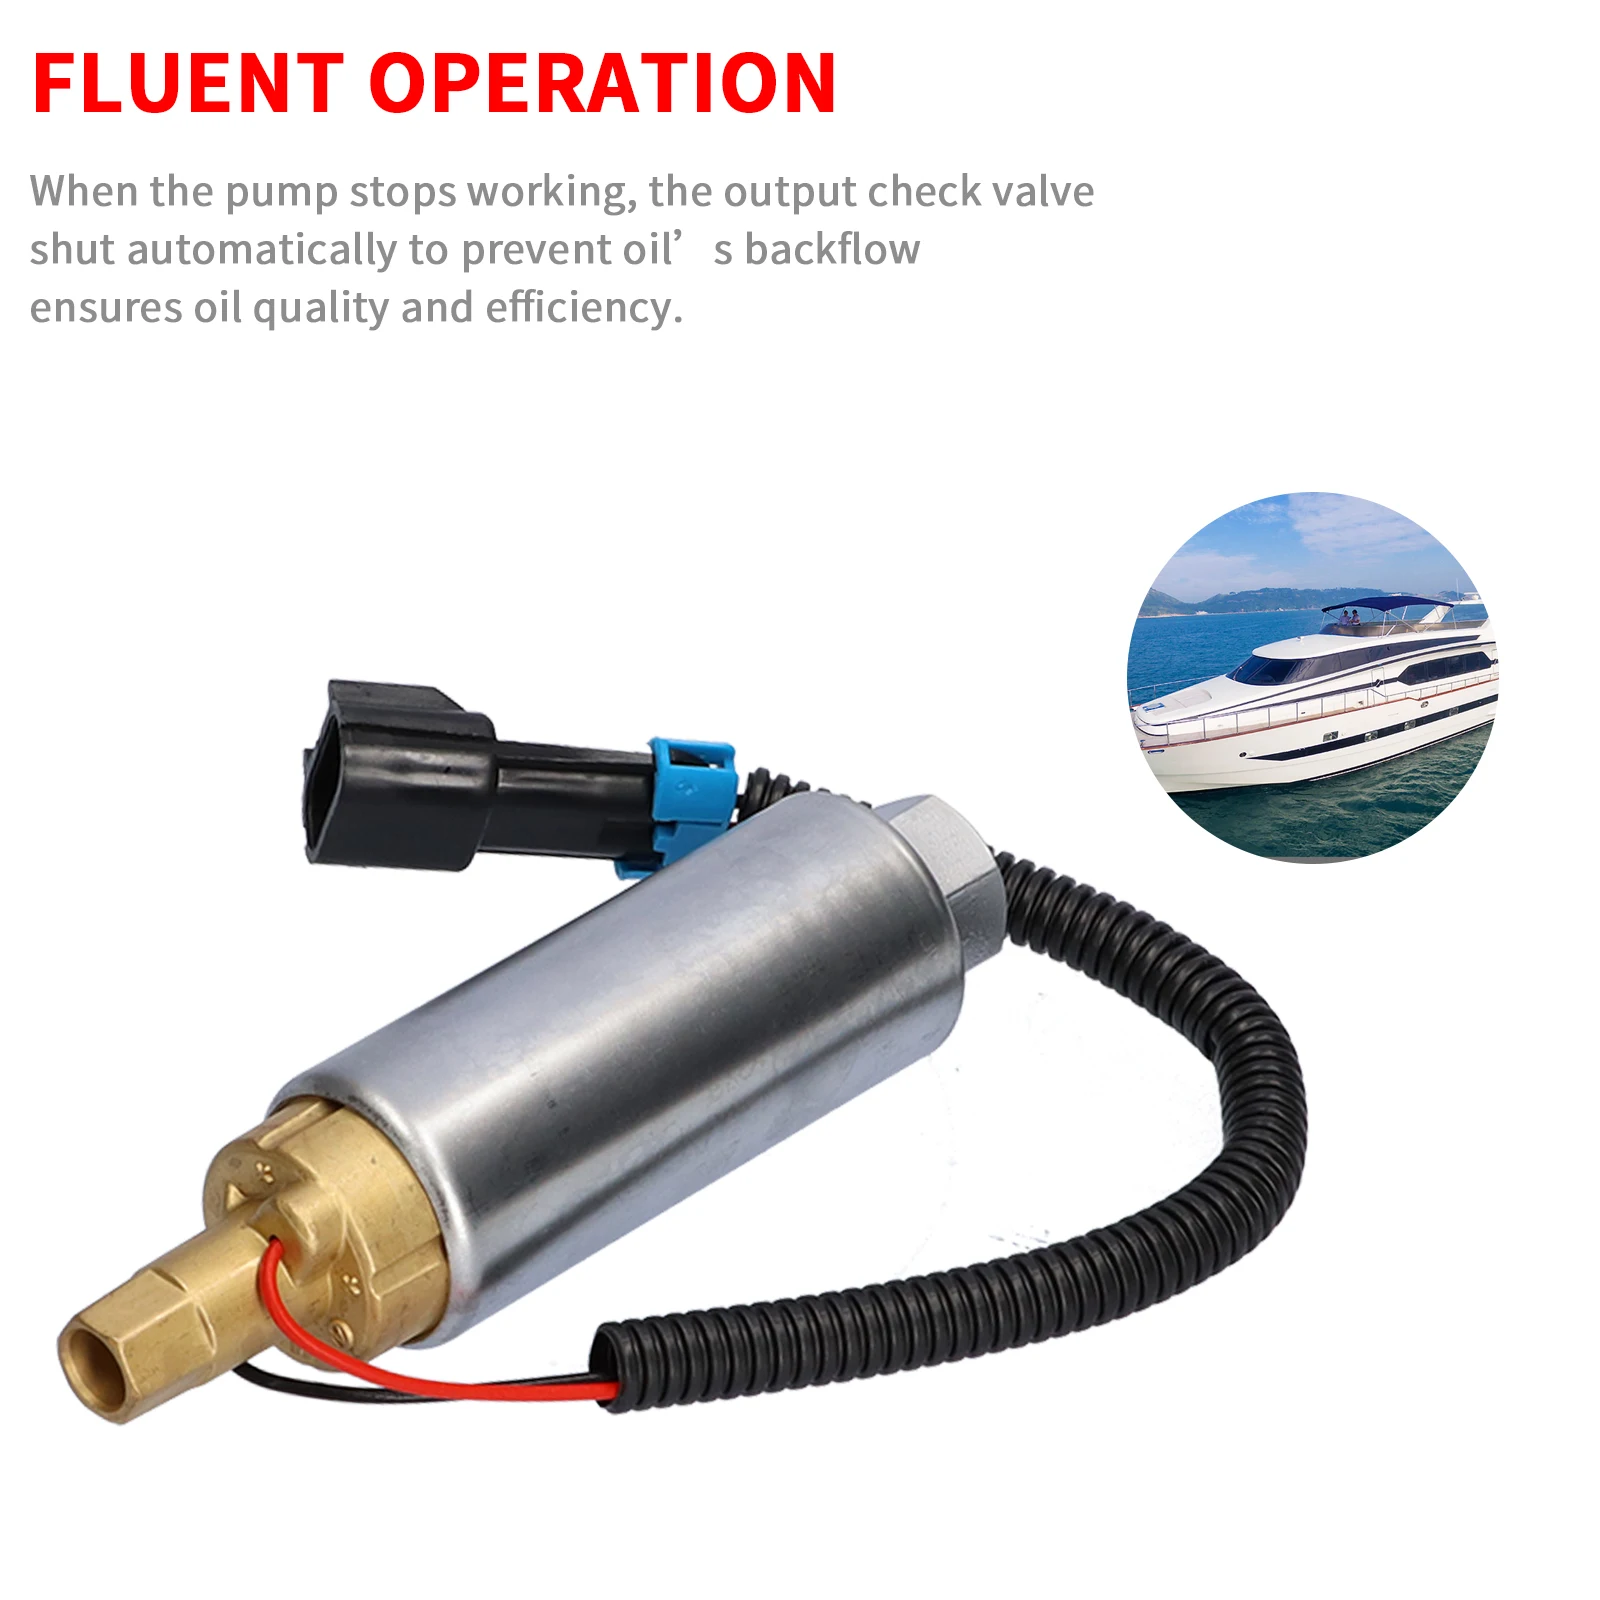 

New Hot Sale Dropshipping Electric Fuel Pump 861153 807949A1 861156A2 Suitable For Mercruiser Carburated 4.3 5.0 5.7 496 Engine